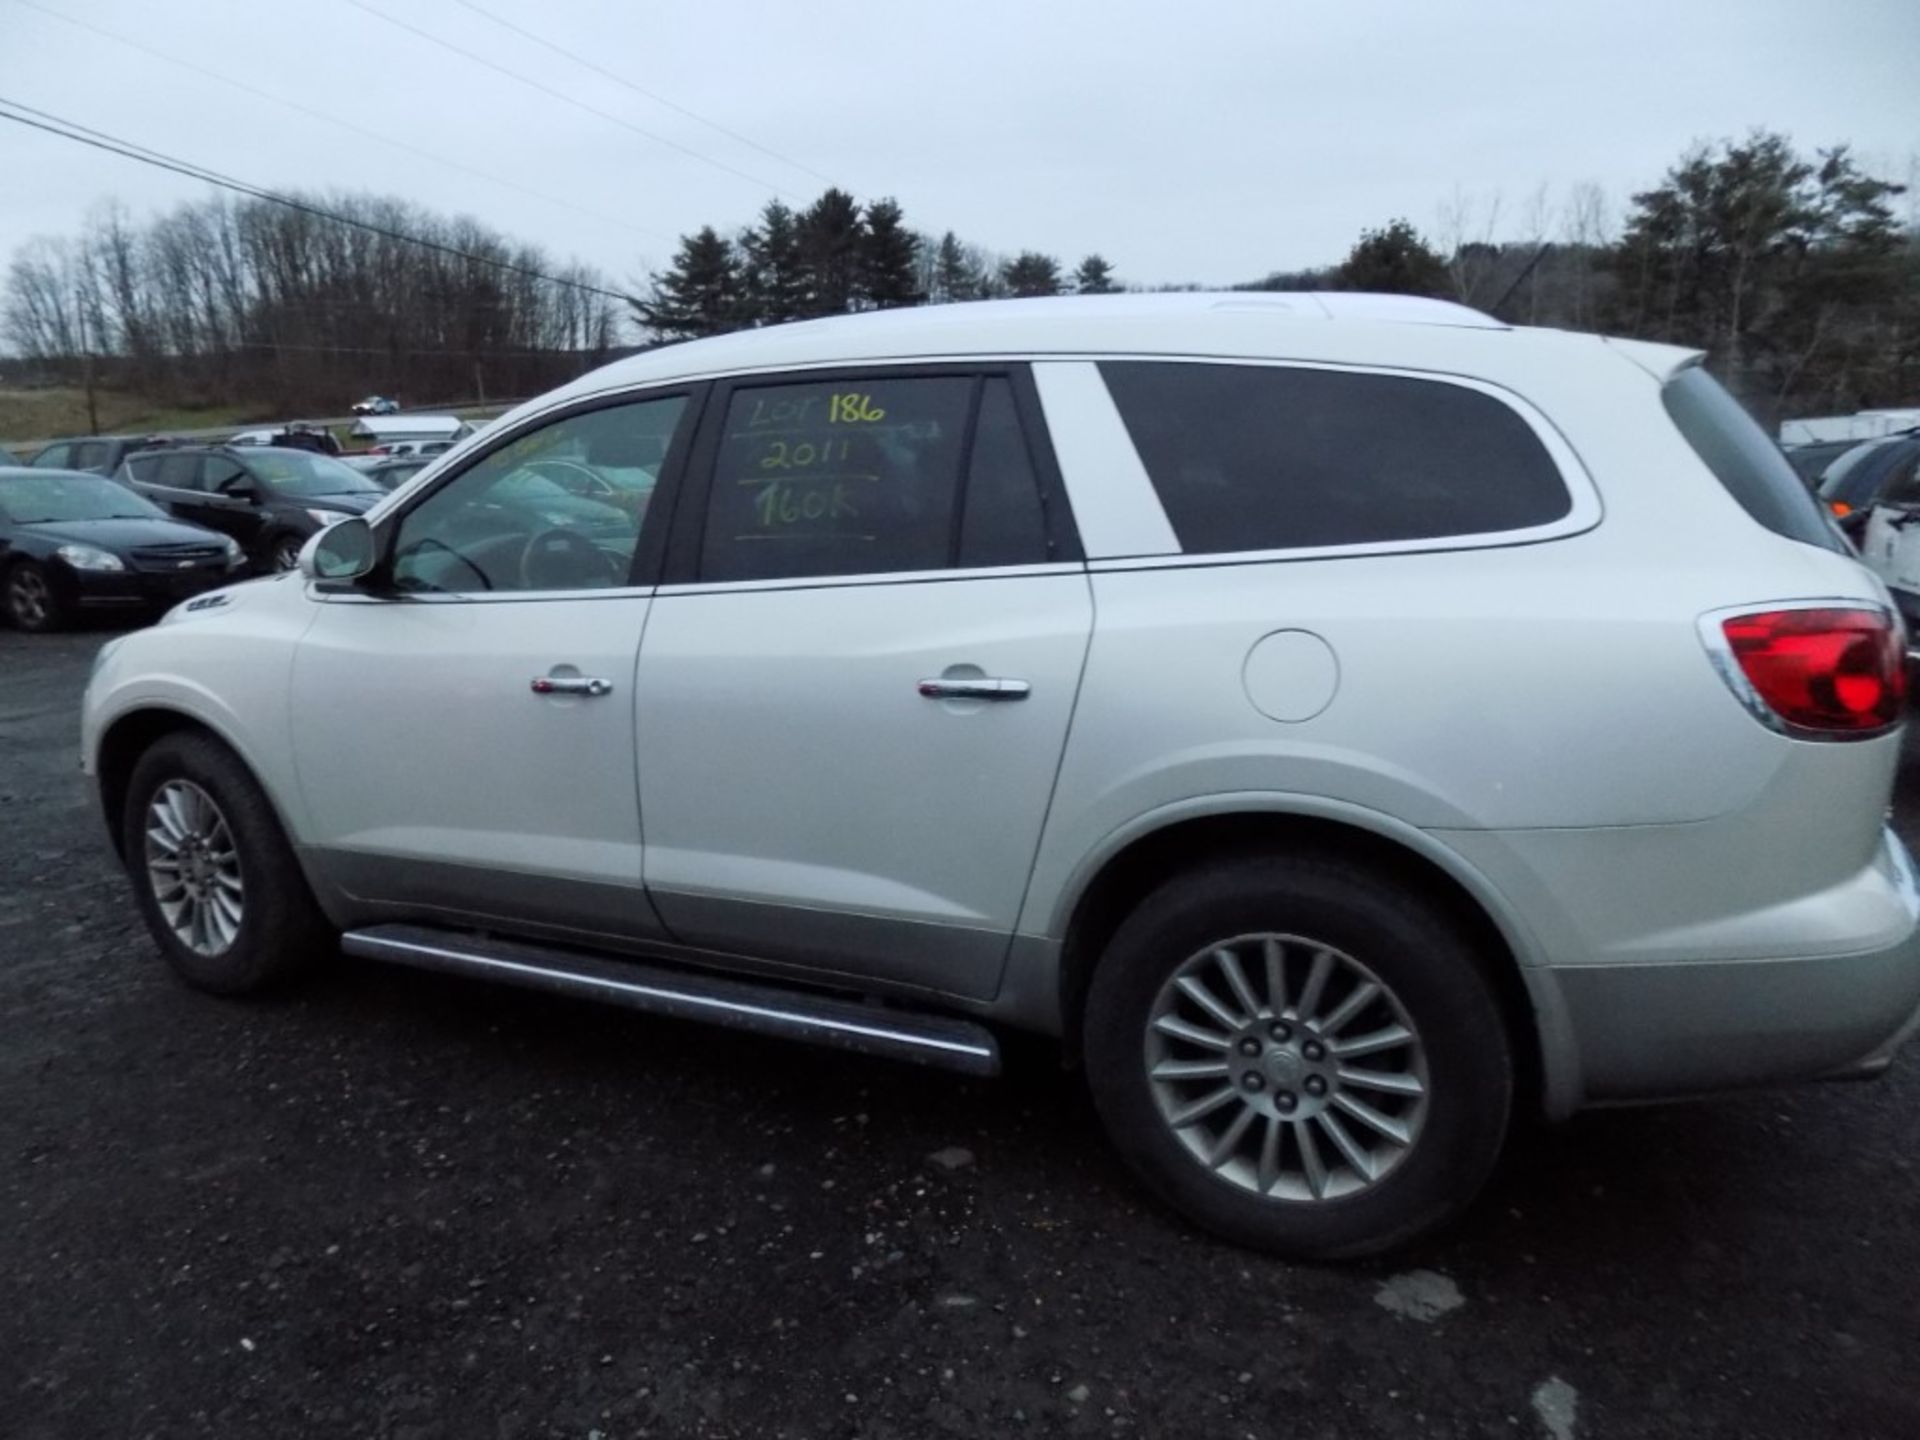 2011 Buick Enclave CXL-1, Leather, Sunroof, Front Wheel Drive, White, 160,845 Mi, PASSENGER FRONT - Image 9 of 13